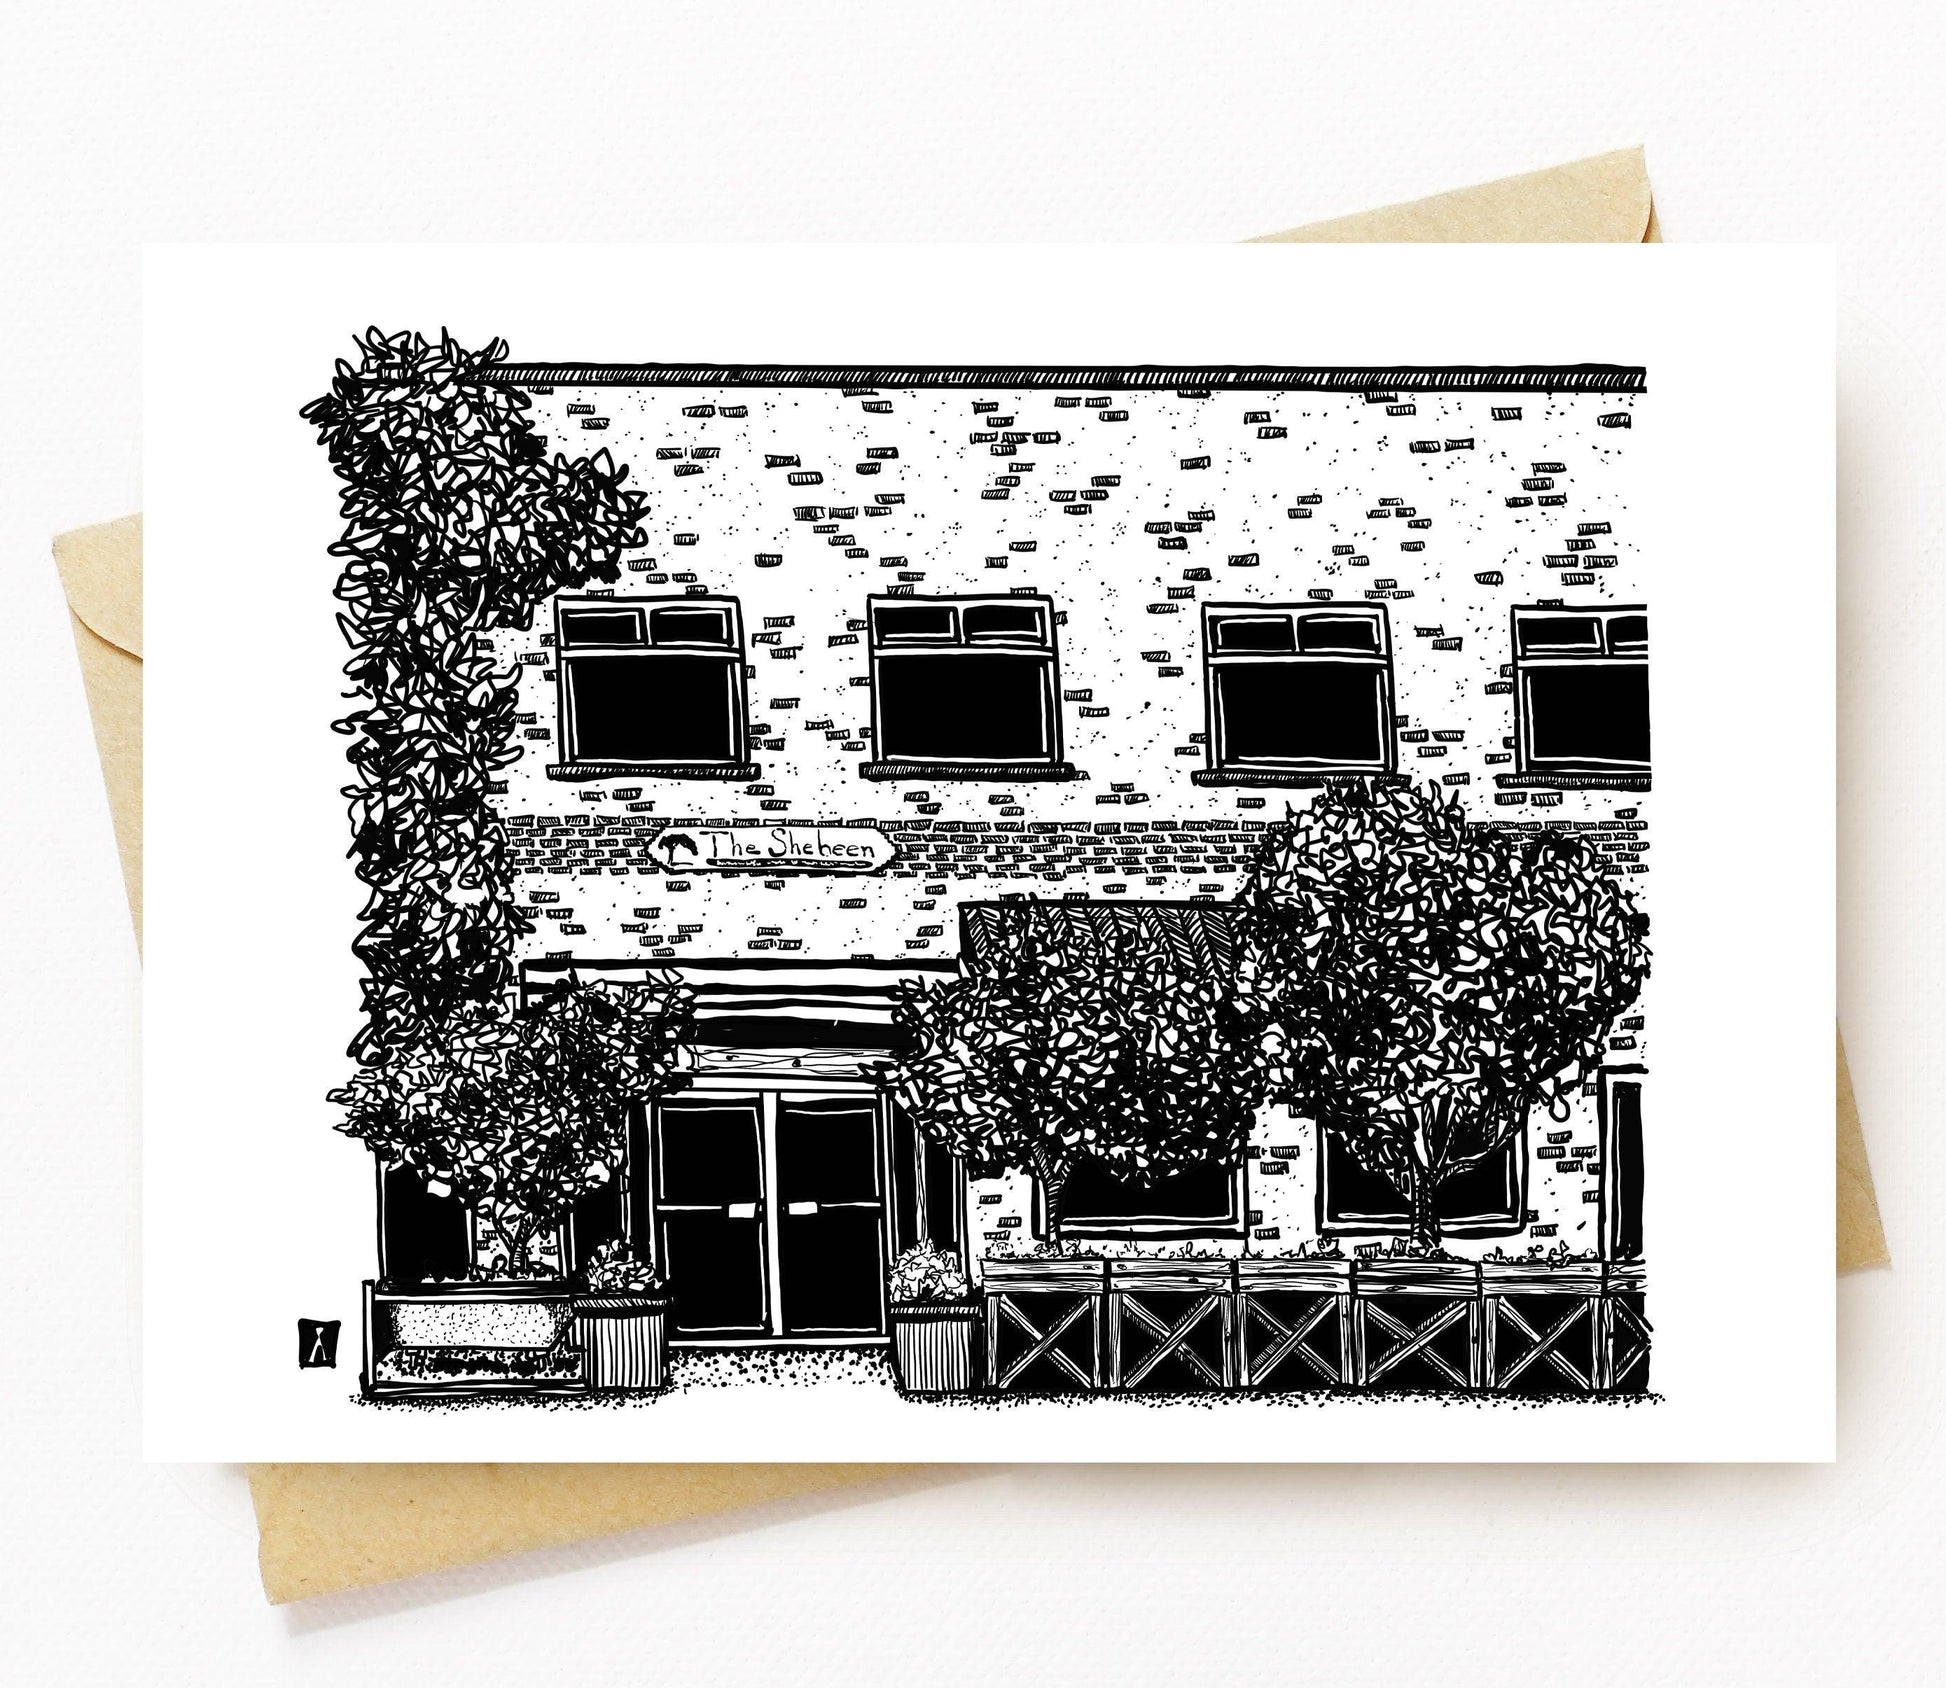 BellavanceInk: Greeting Card With Pen And Ink Illustration Of The Shebeen Restaurant In Charlottesville 5 x 7 Inches - BellavanceInk